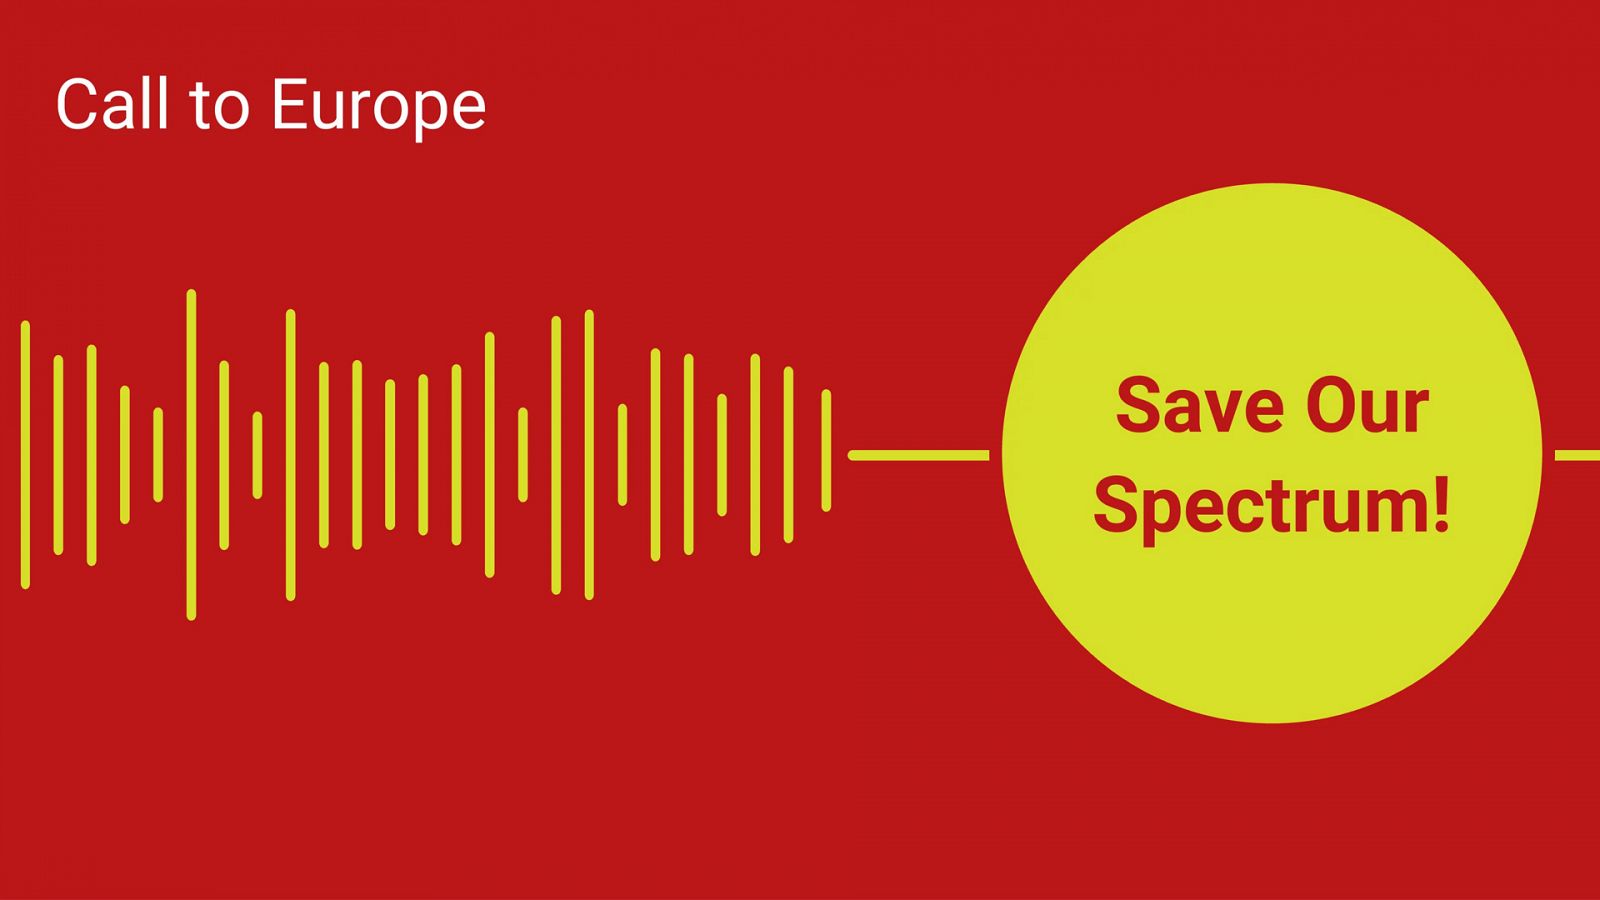 Call to Europe: Save our Spectrum